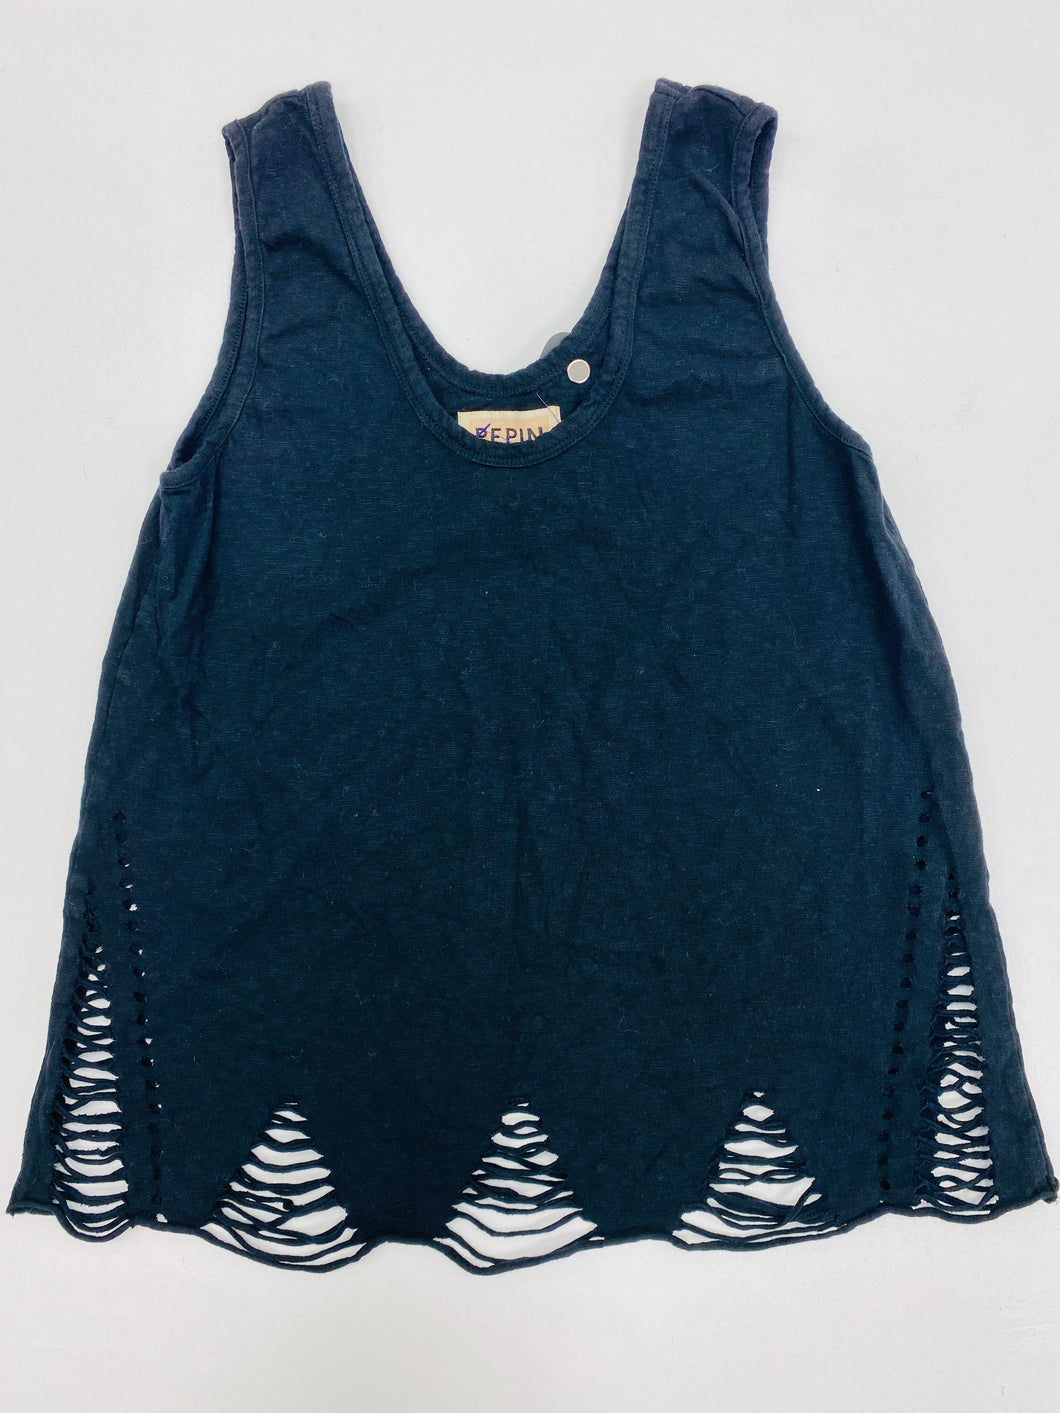 Womens Tank Top Size Extra Small